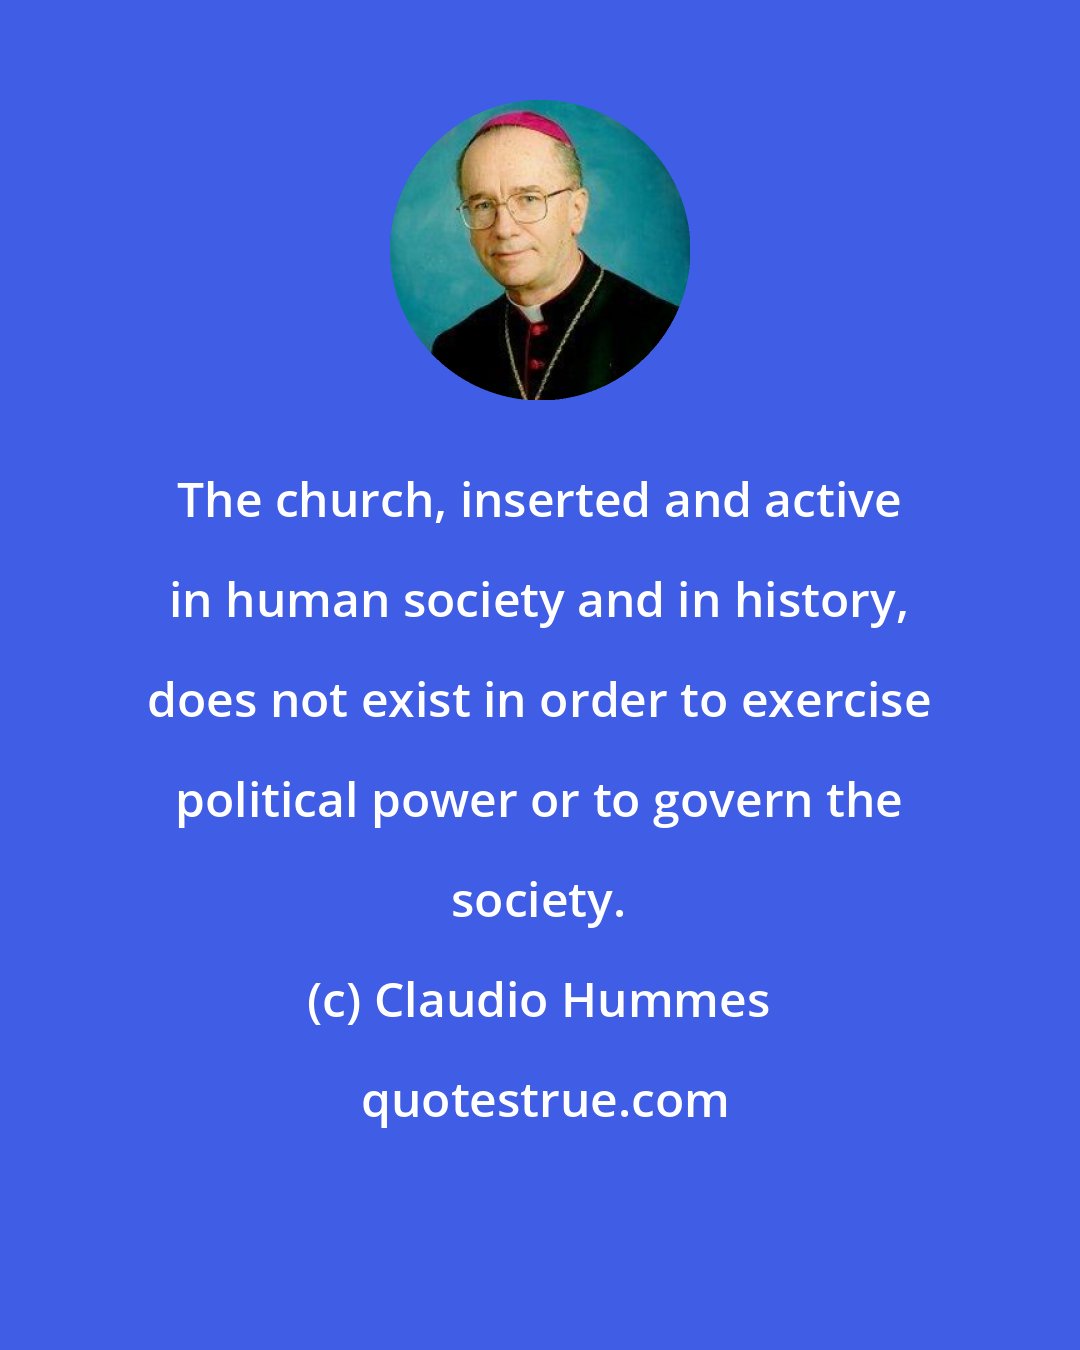 Claudio Hummes: The church, inserted and active in human society and in history, does not exist in order to exercise political power or to govern the society.